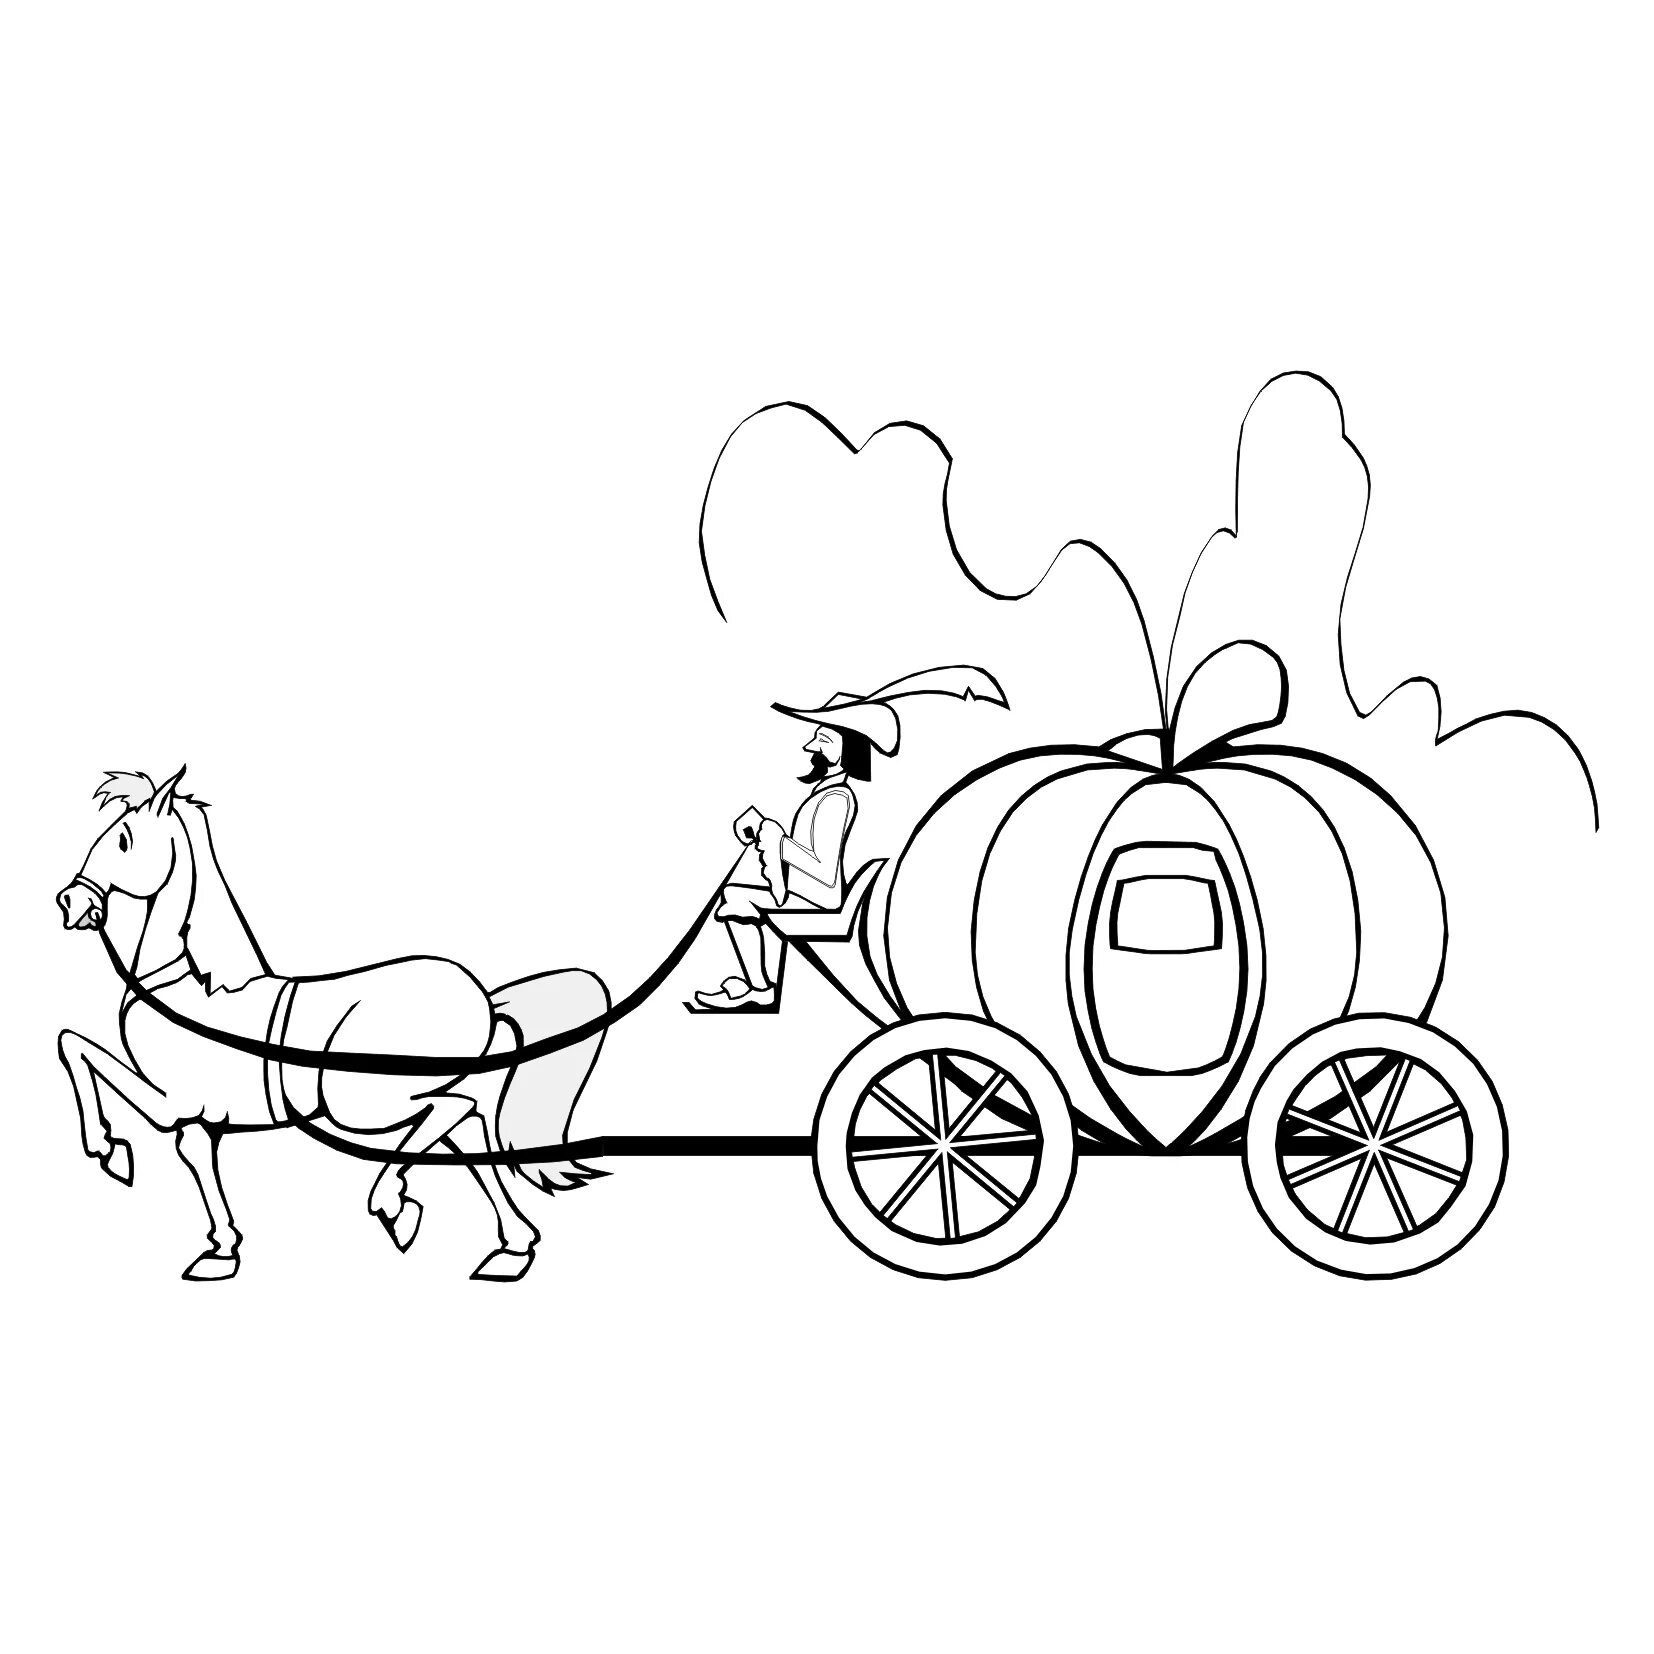 Sparkling carriage coloring book for kids